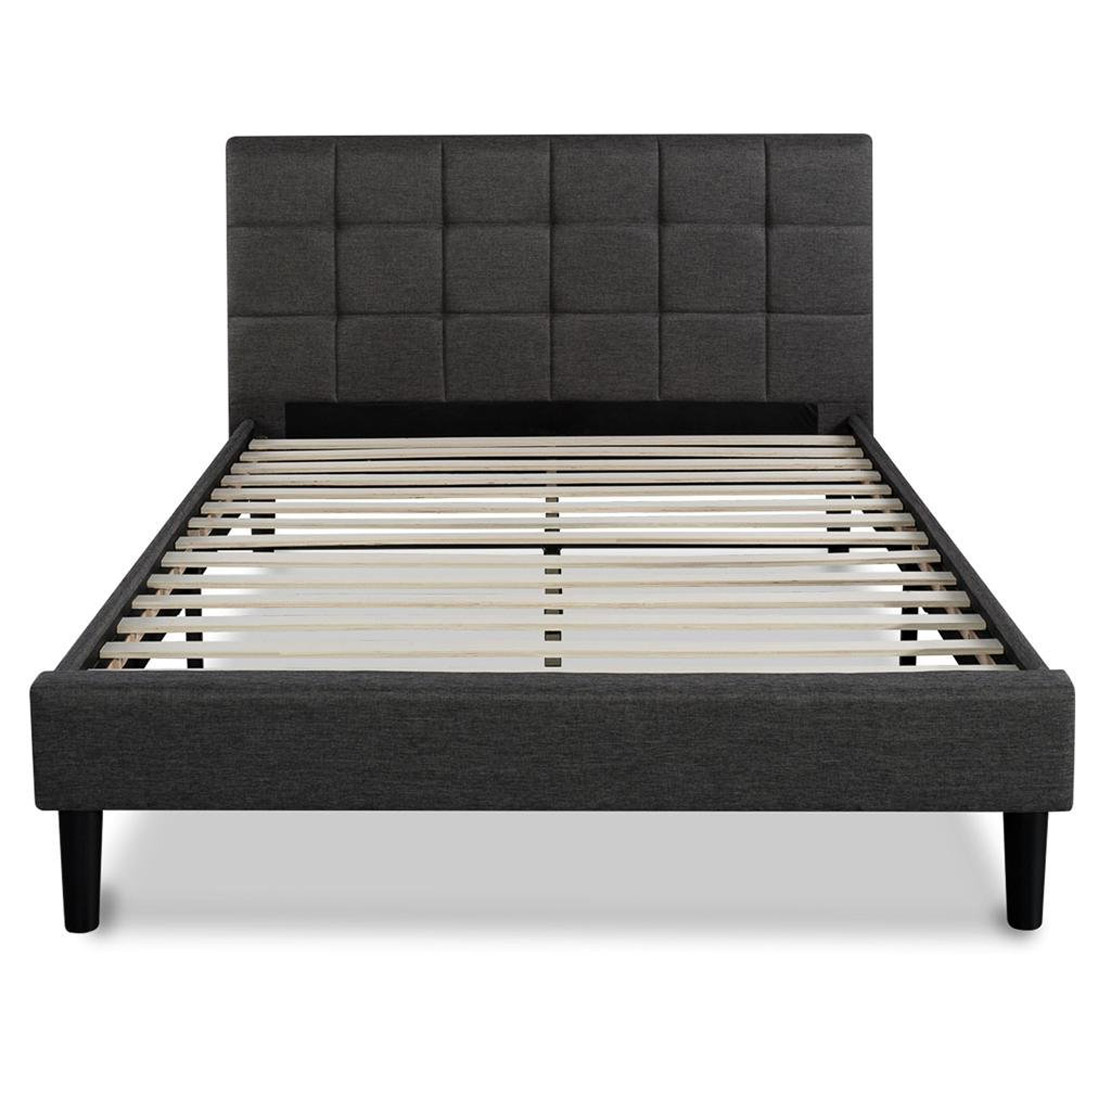 GreenHome123 Grey Upholstered Platform Bed Frame with Wooden Slats and Padded Headboard in Twin Full Queen King